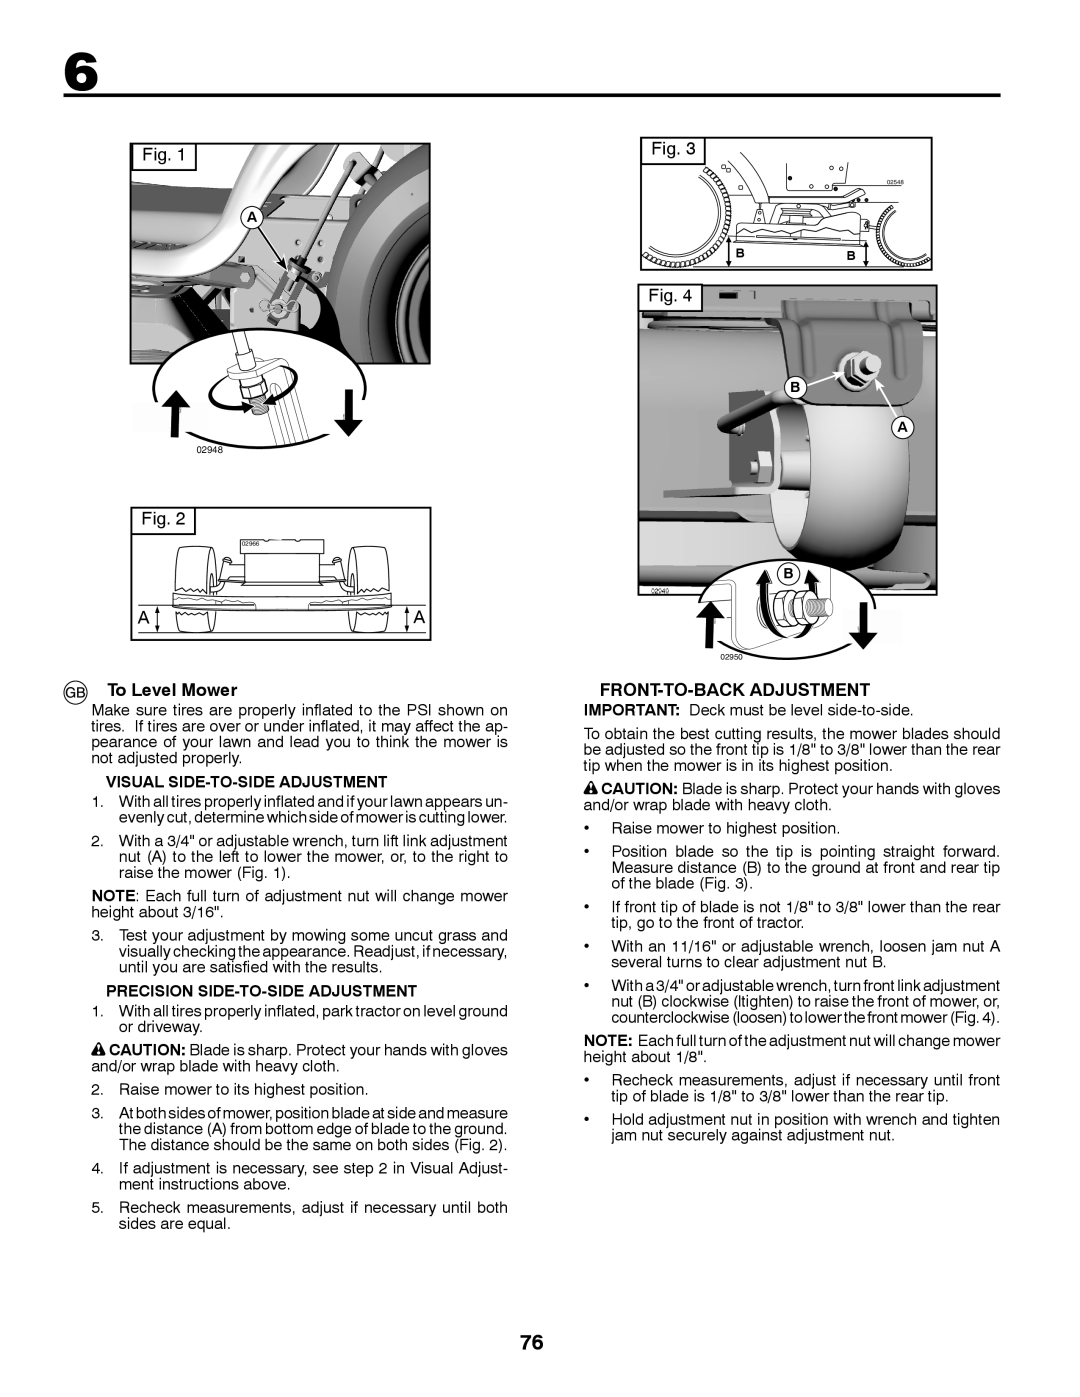 Jonsered LT2213C instruction manual Fig, To Level Mower, Front-To-Backadjustment 